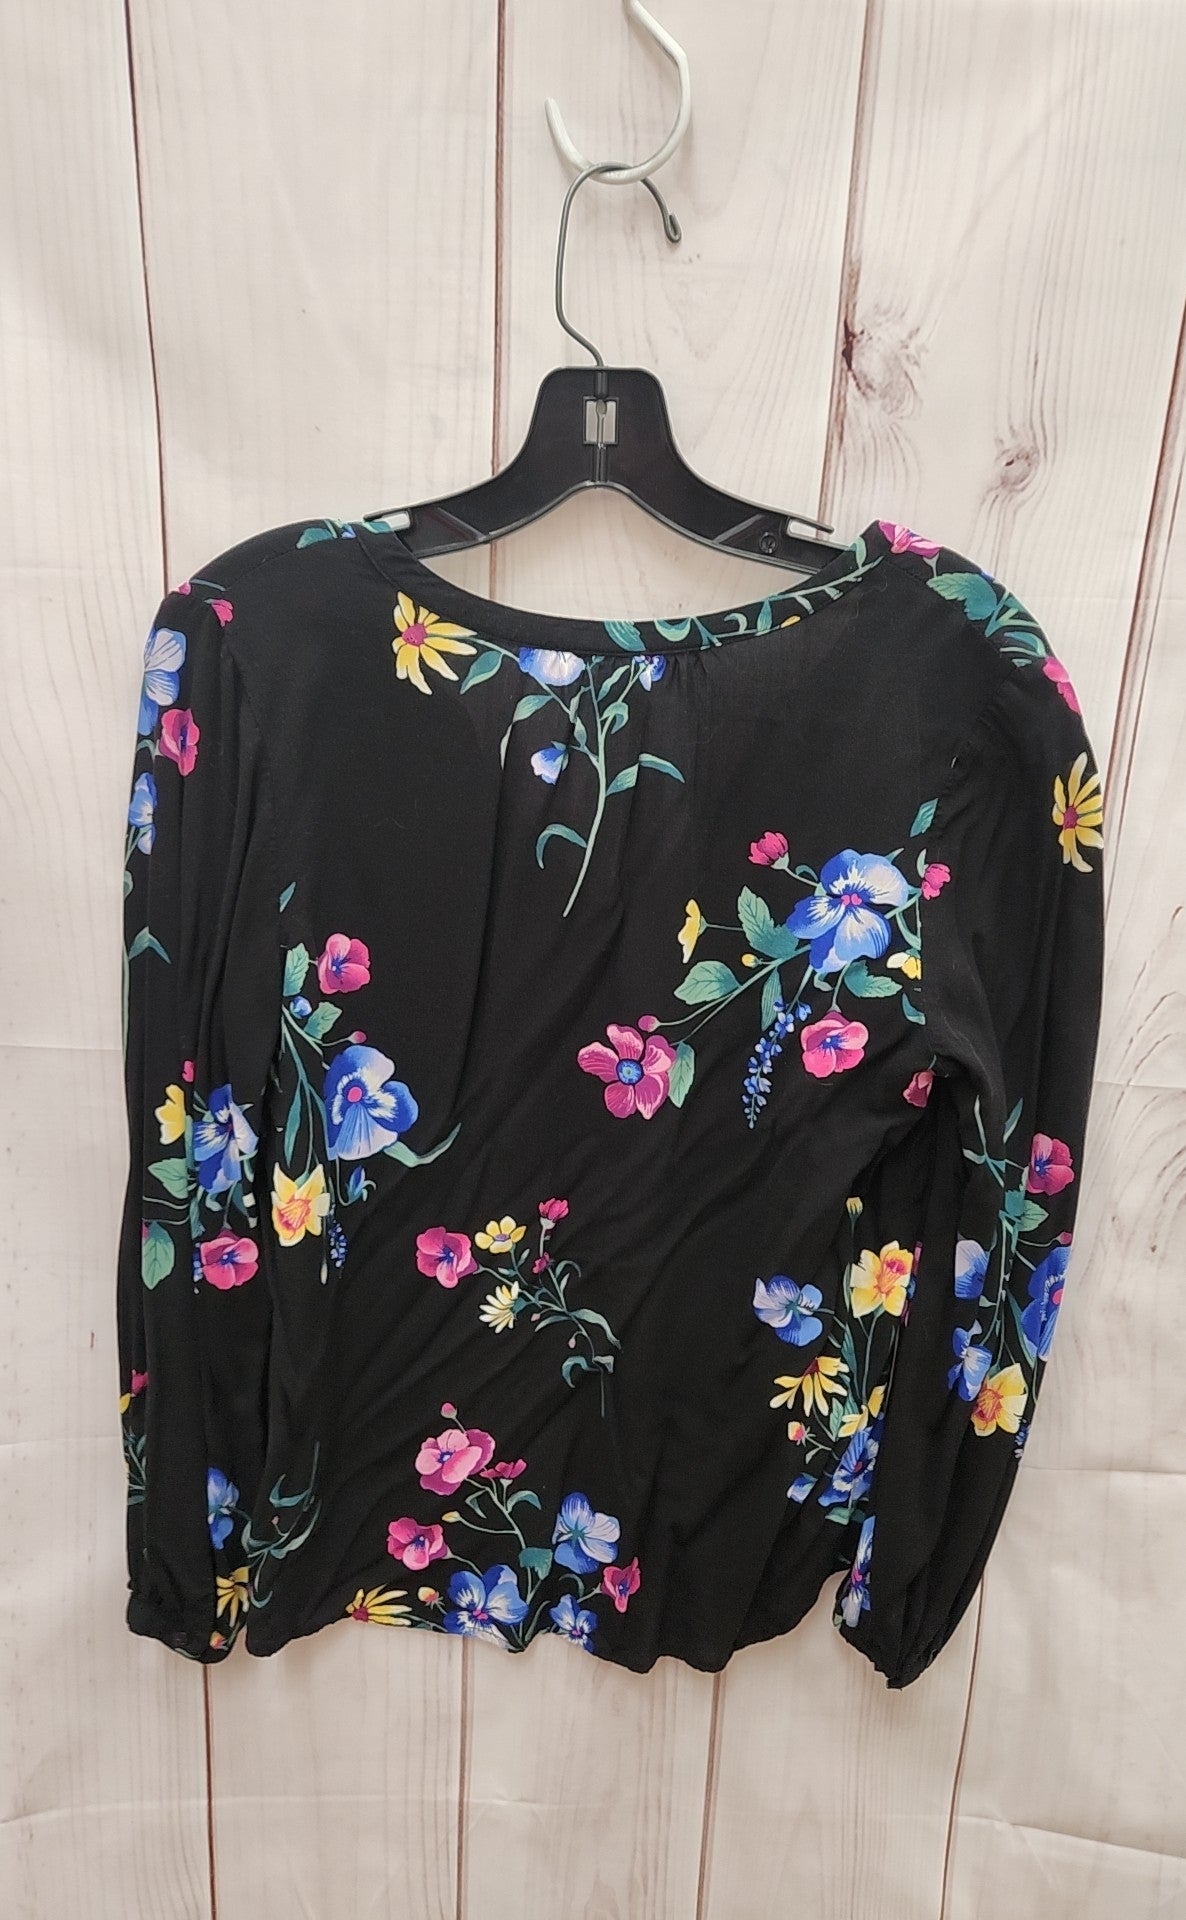 Old Navy Women's Size S Black Long Sleeve Top